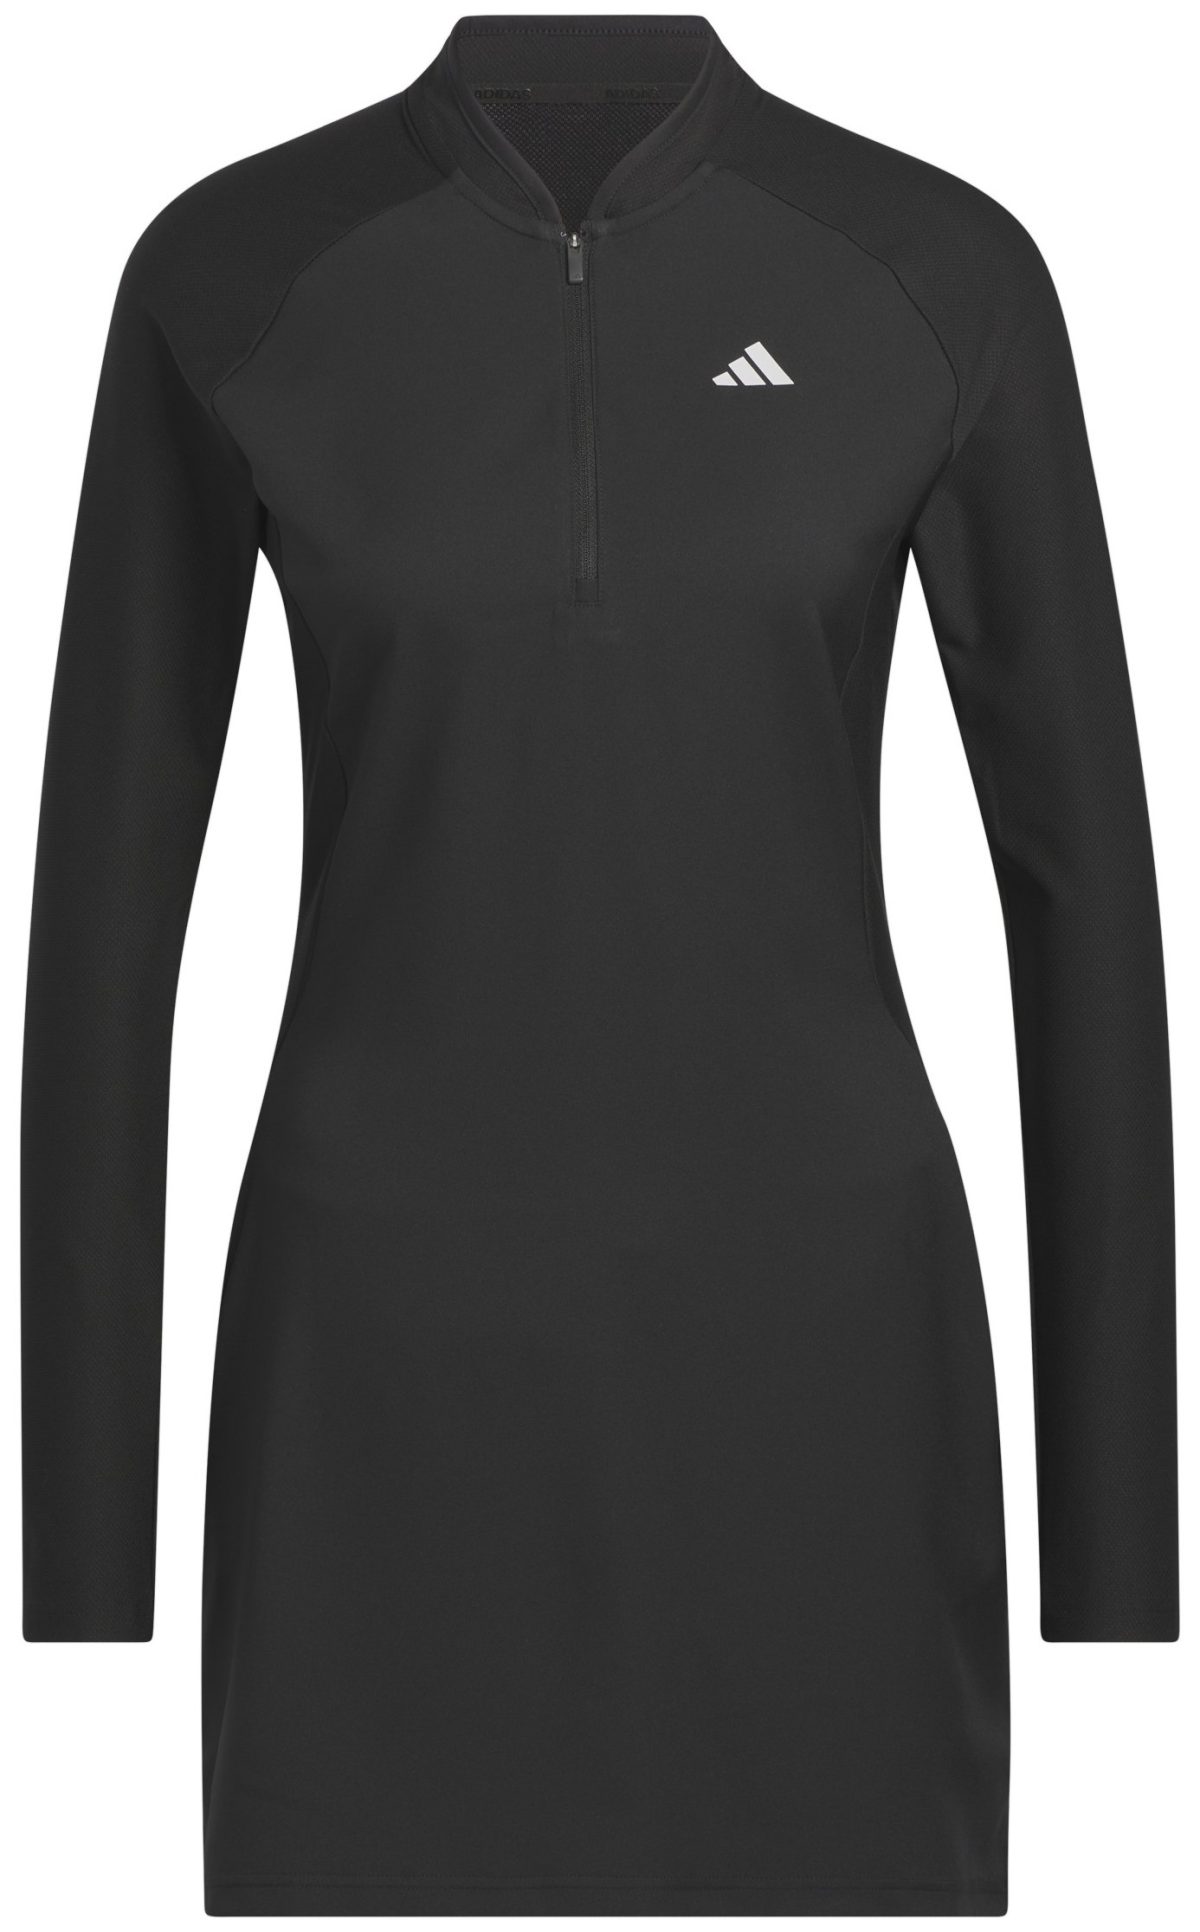 adidas Women's Long Sleeve Golf Dress, Cotton/Polyester in Black, Size XL